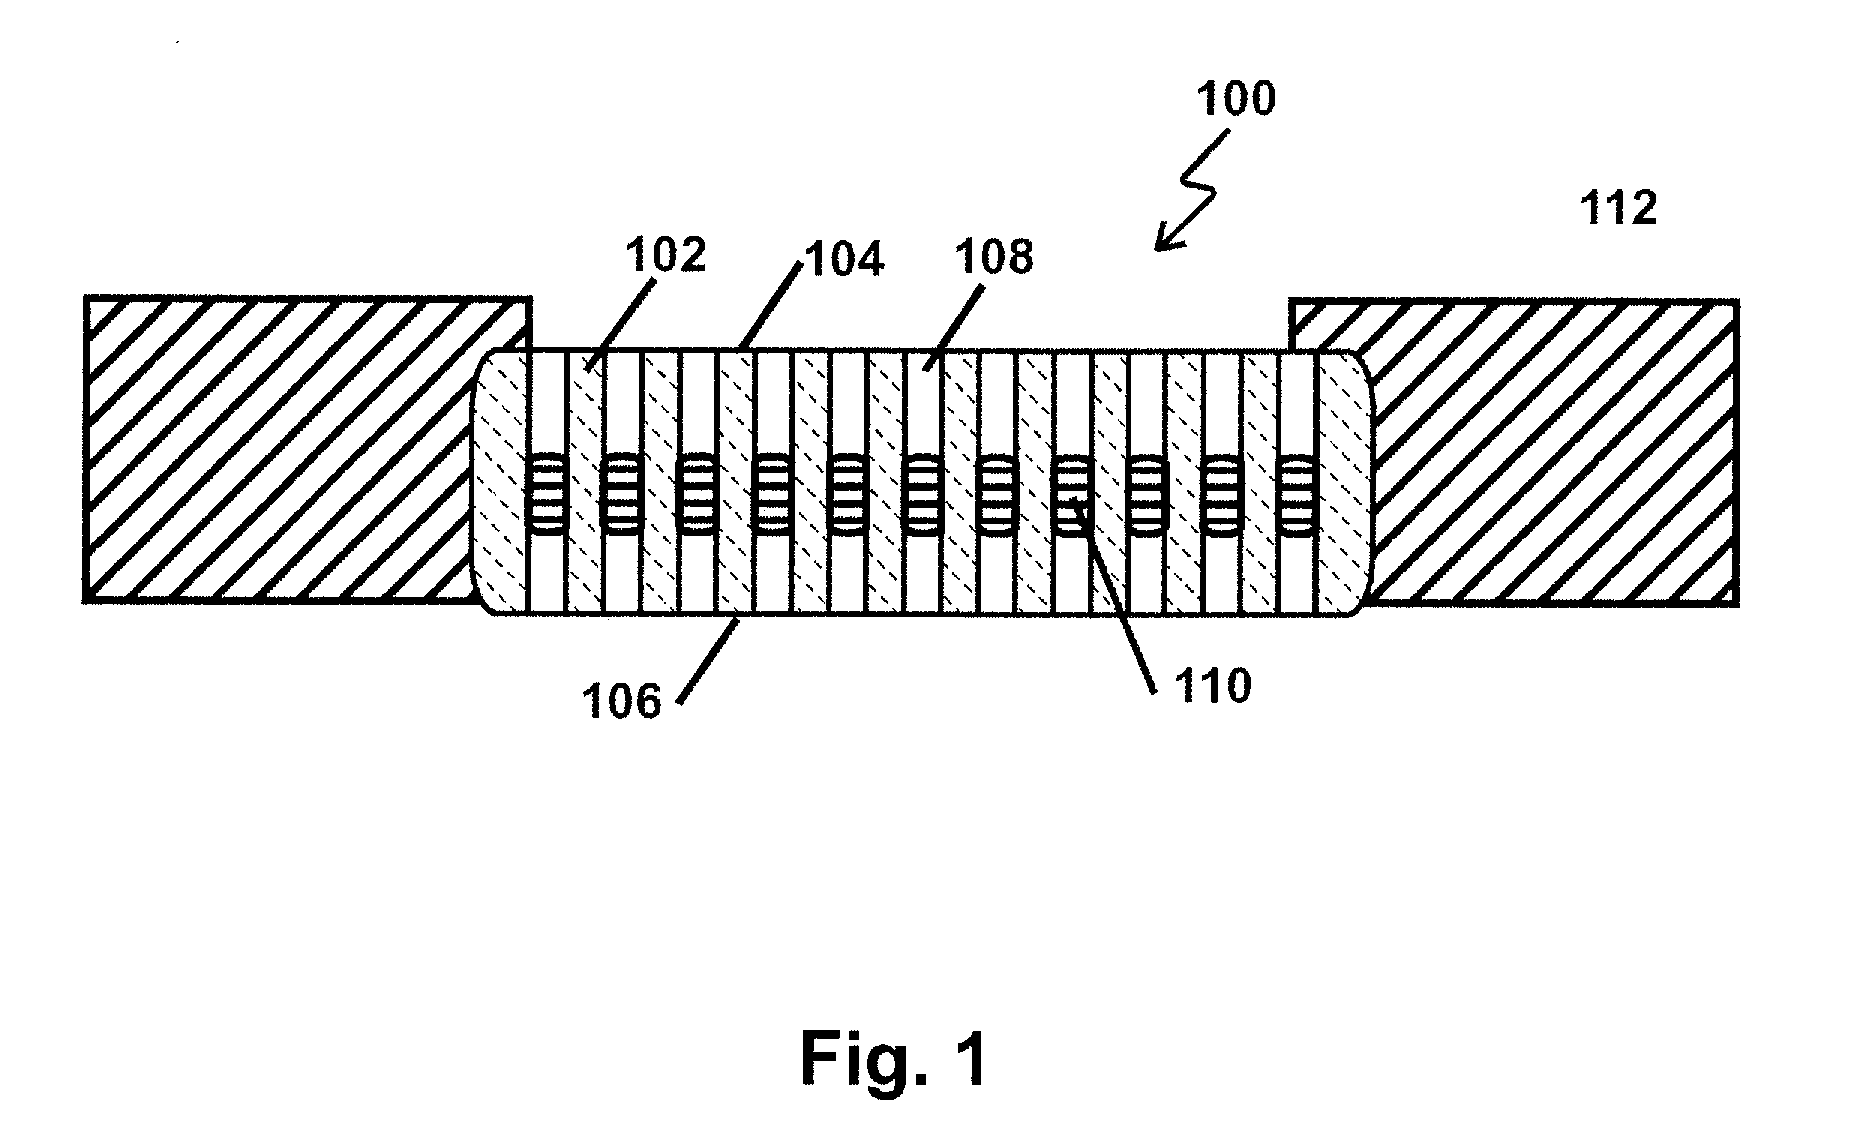 Methods for making membranes based on anodic aluminum oxide structures